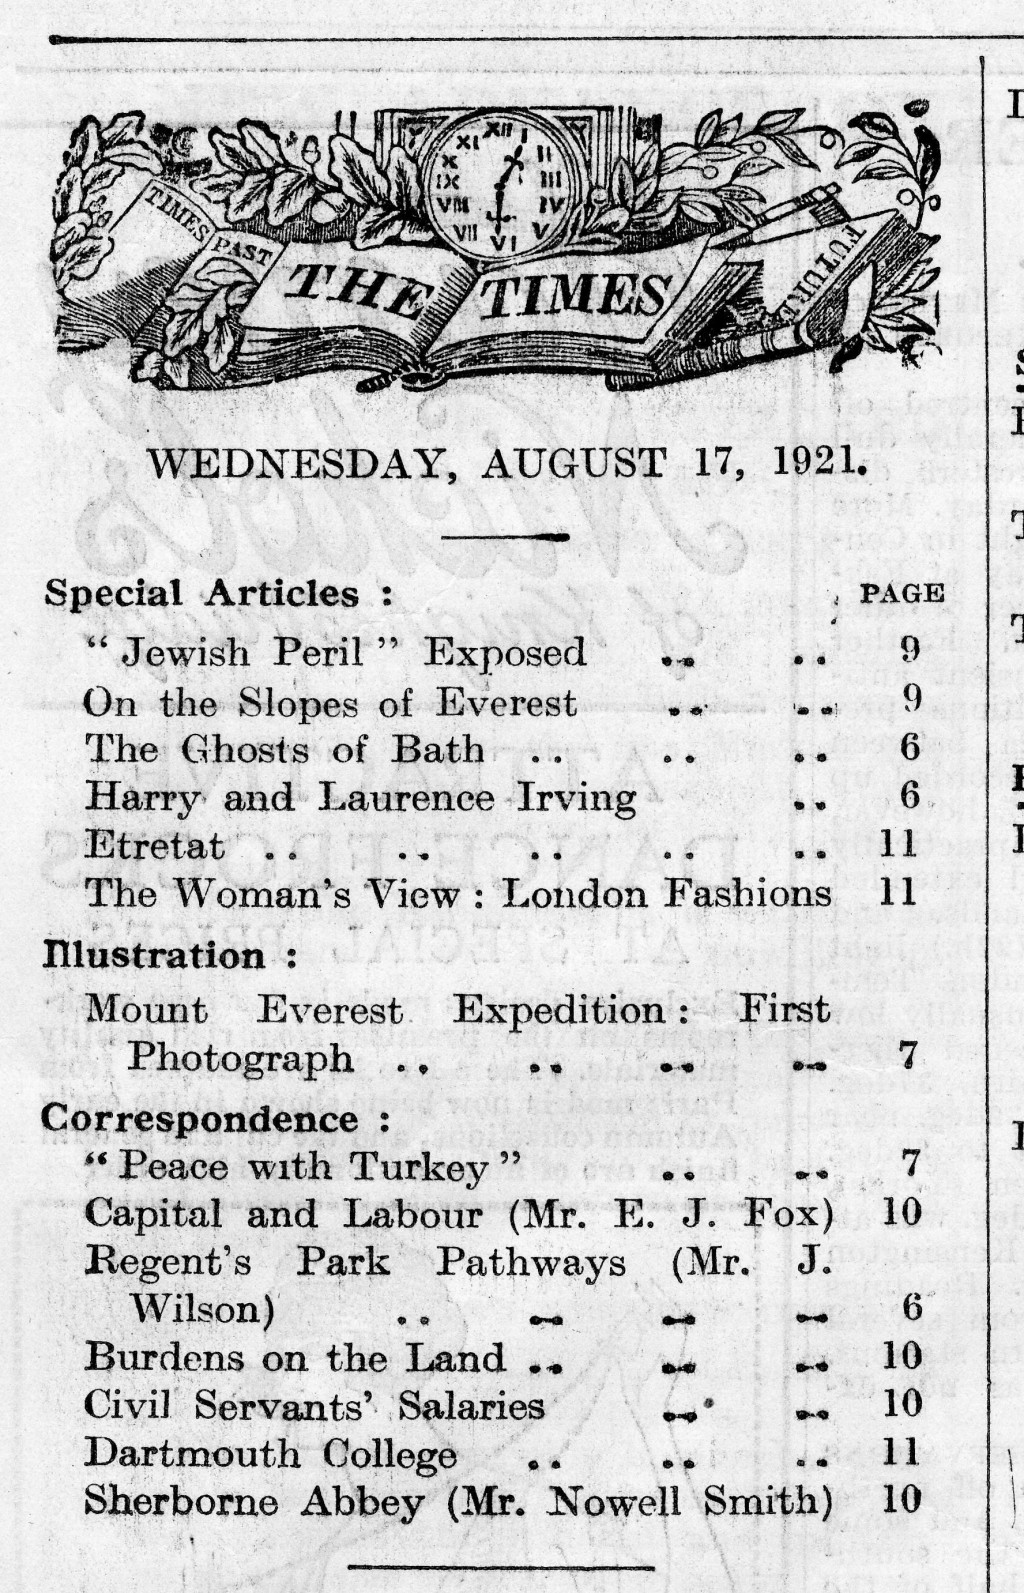 The Times, August 17, 1921